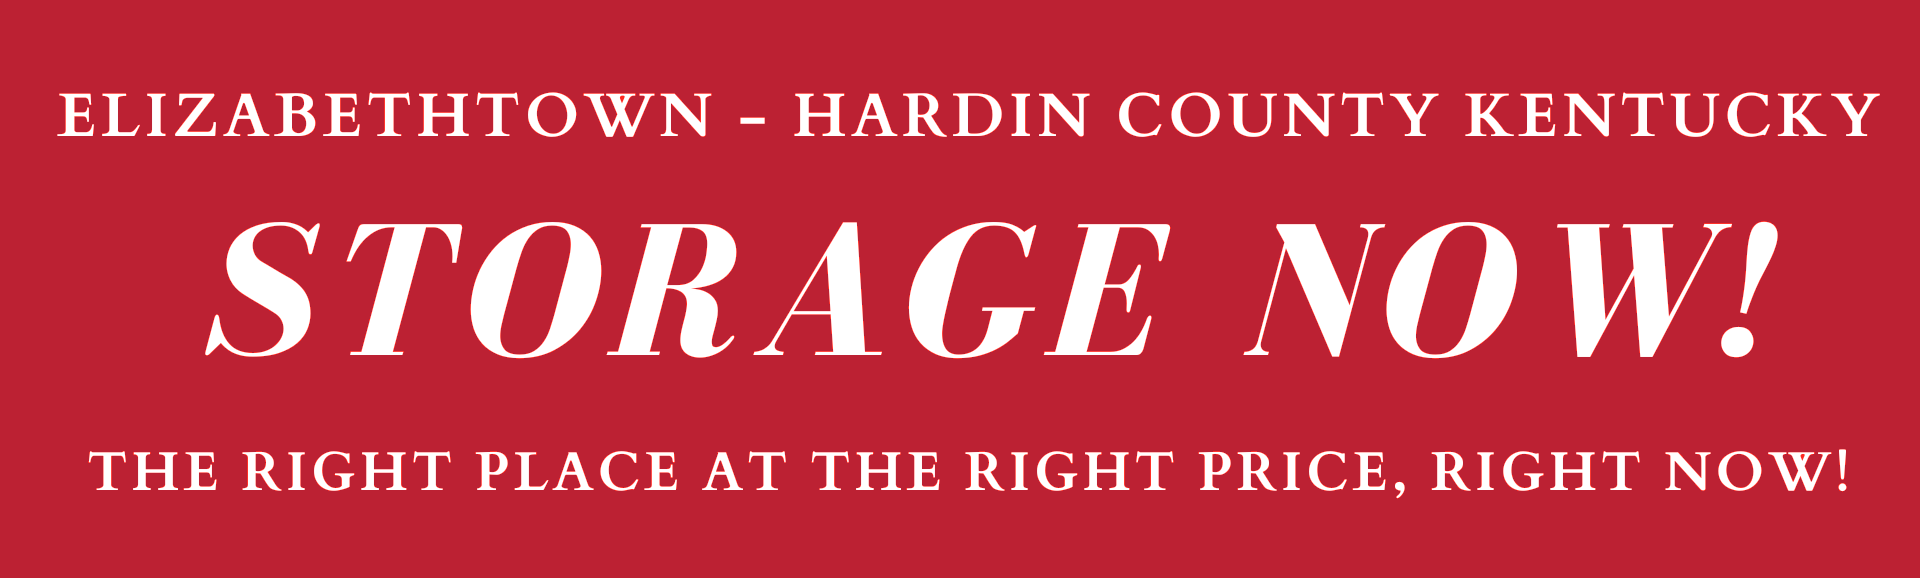 Elizabethtown - Hardin County Kentucky - Storage Now - The right place at the right rice, right now!